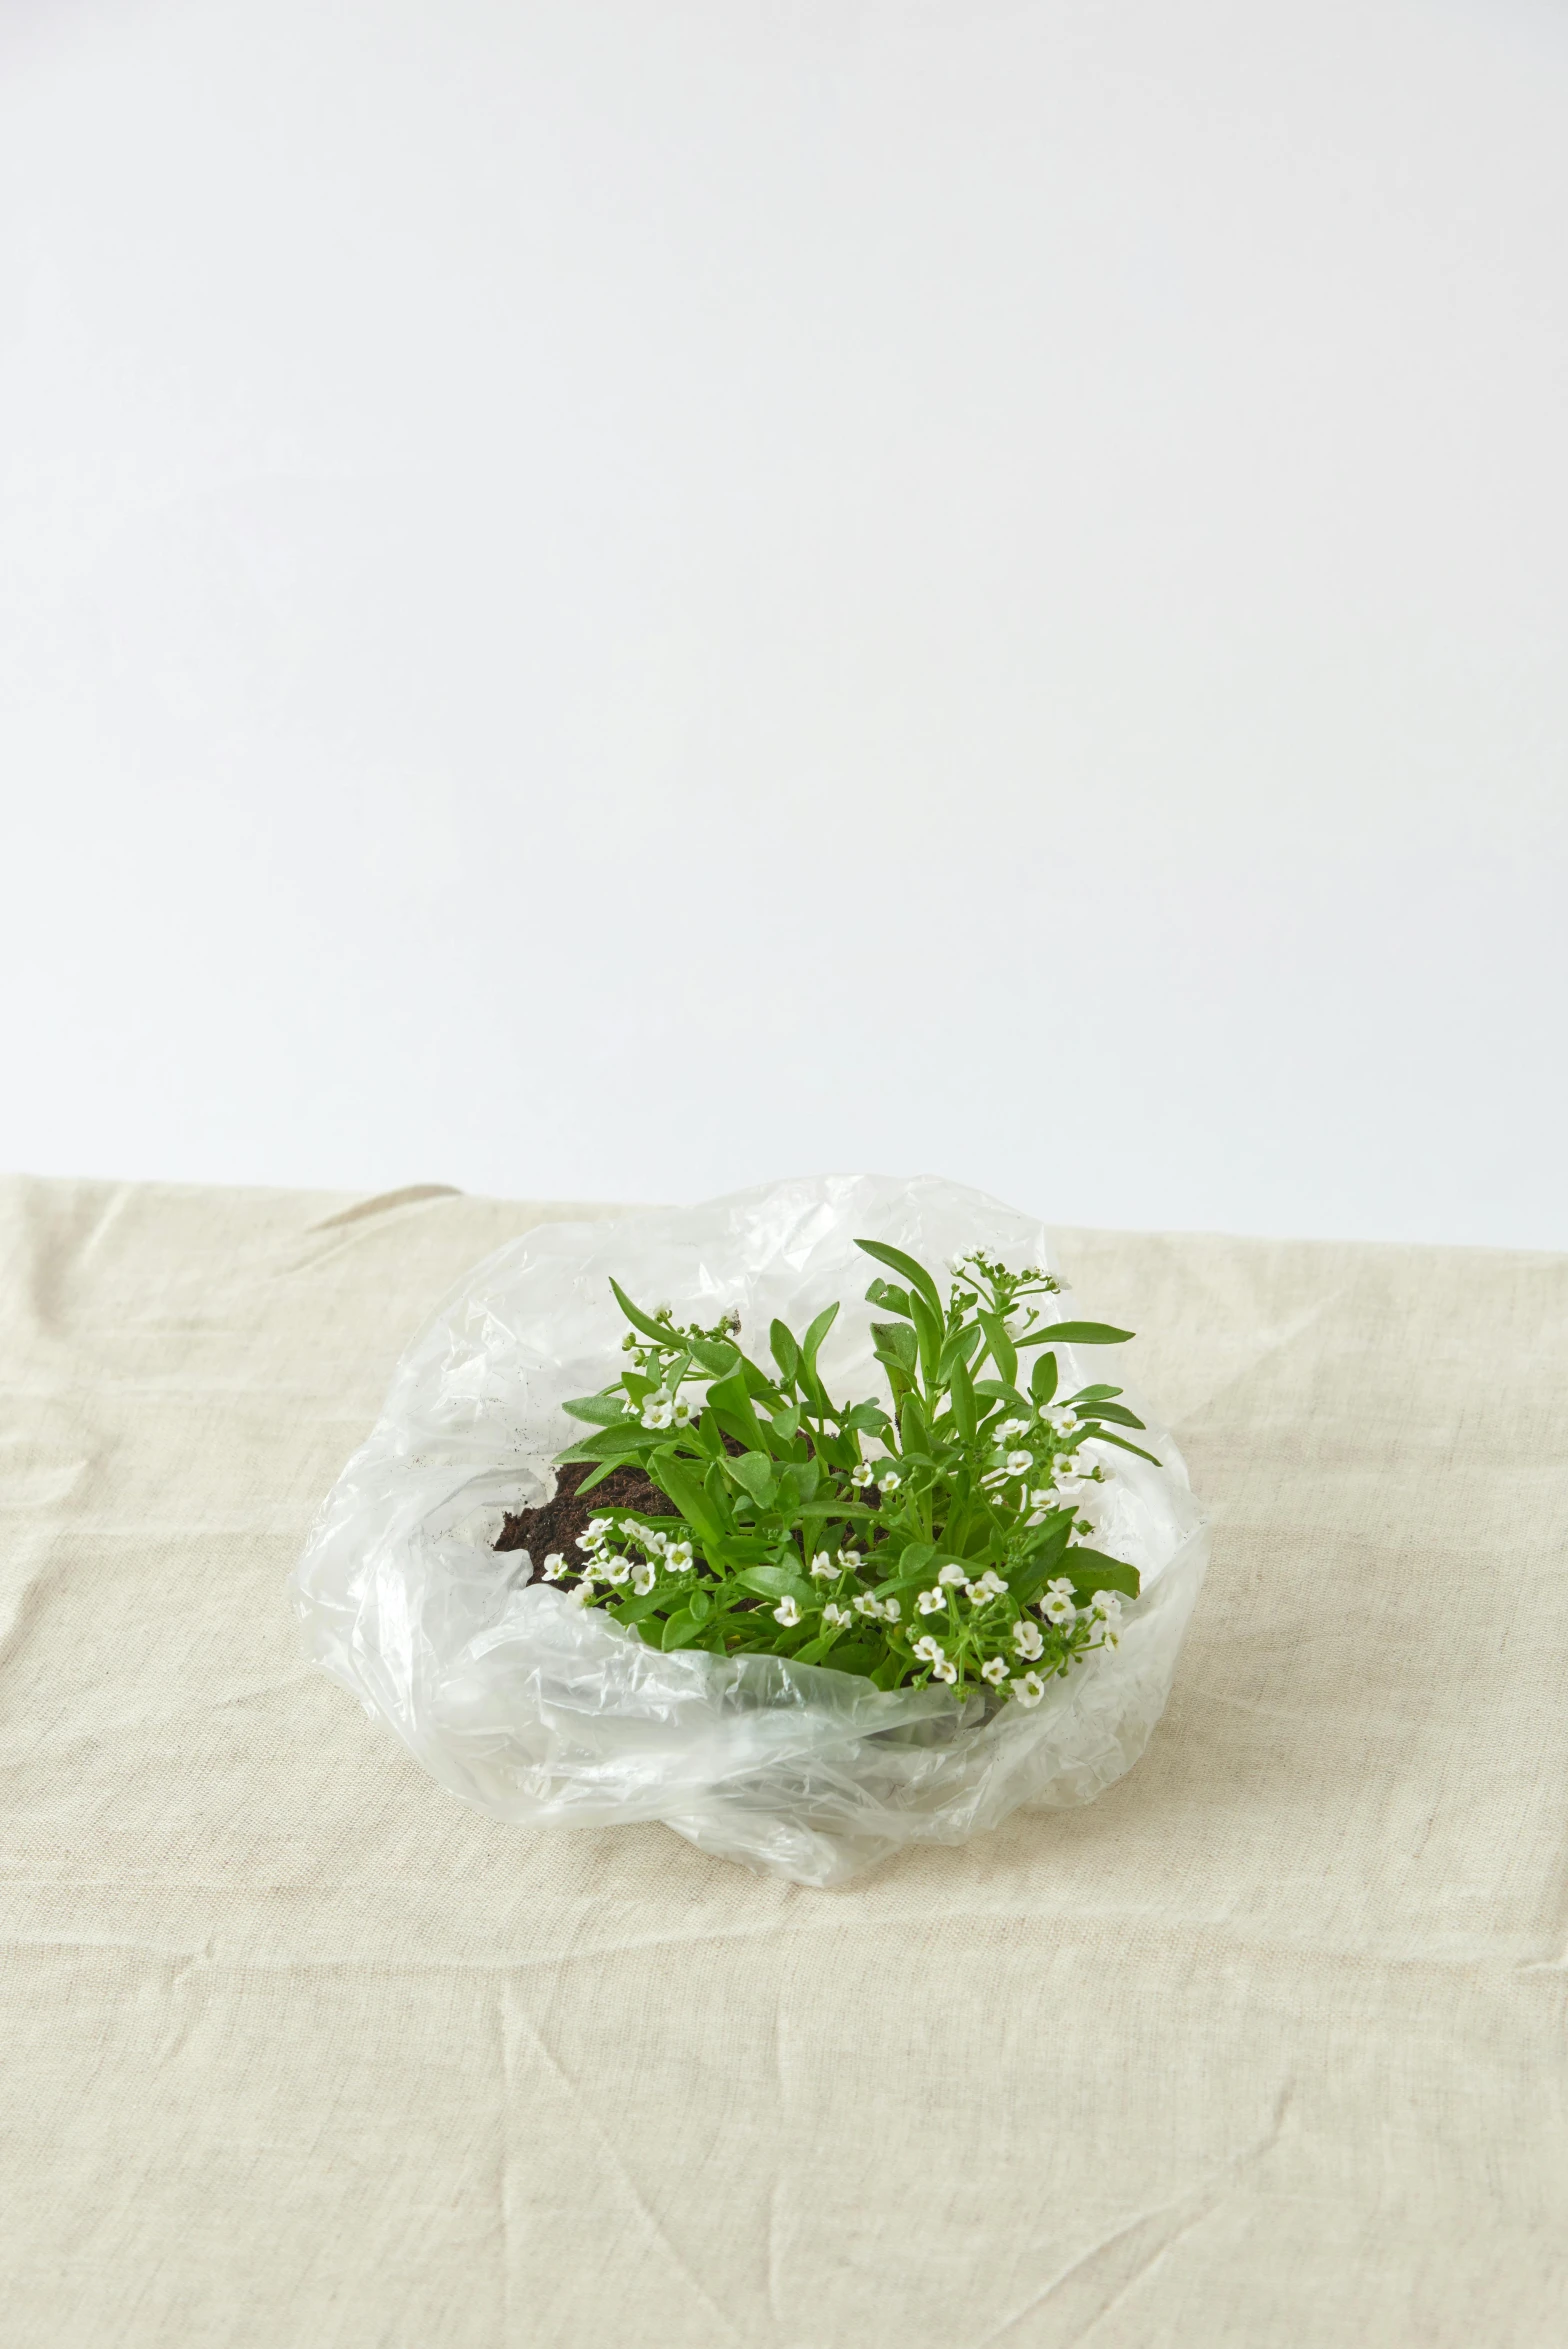 green plant in plastic bag sitting on top of cloth